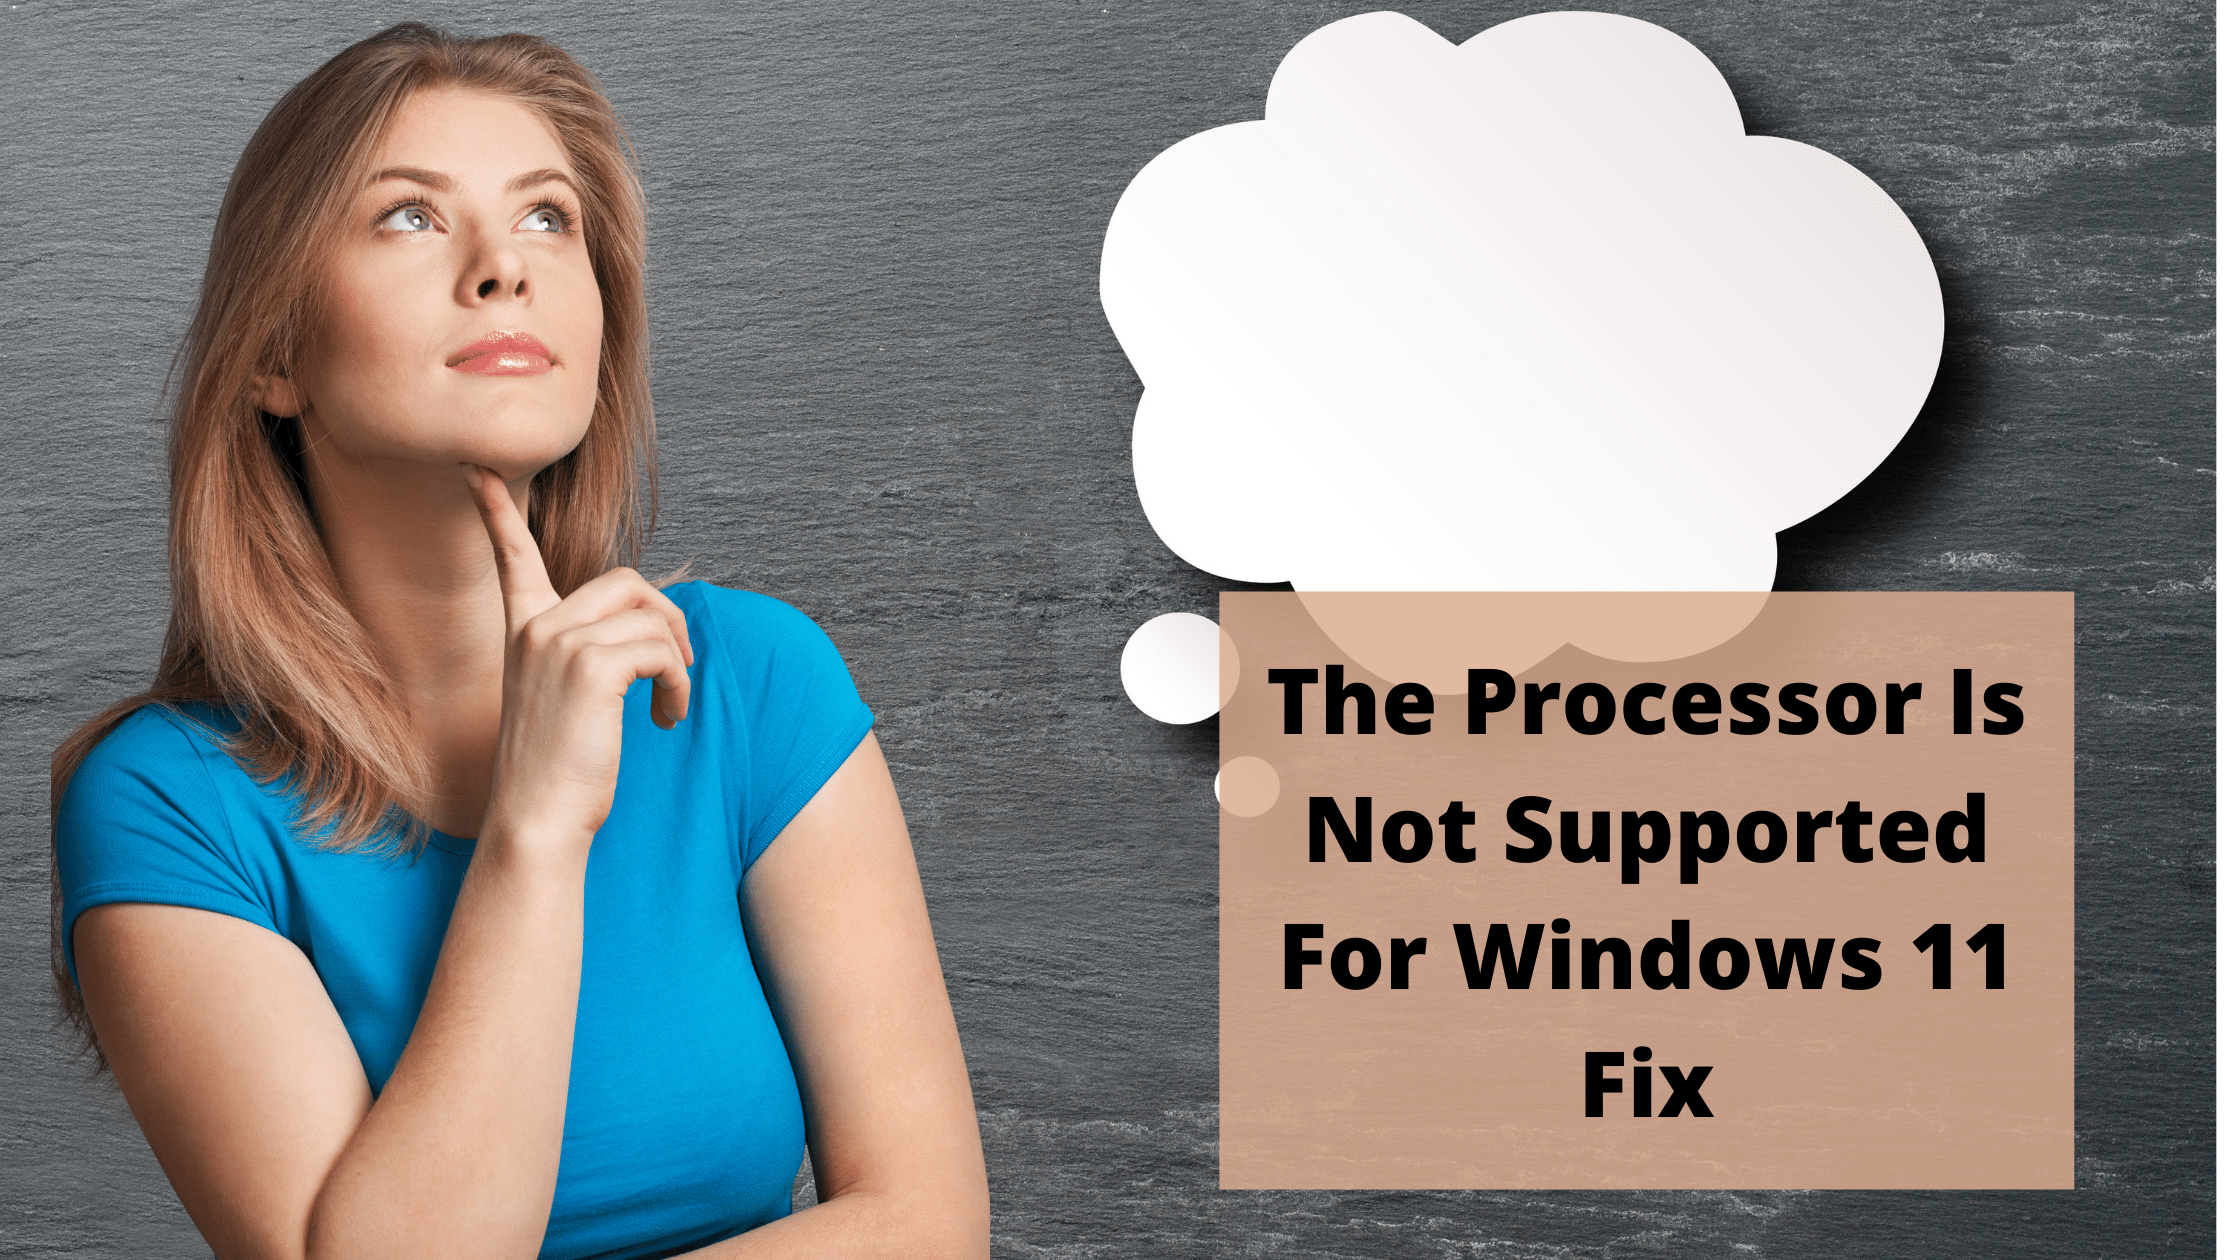 The Processor Is Not Supported For Windows 11 Fix